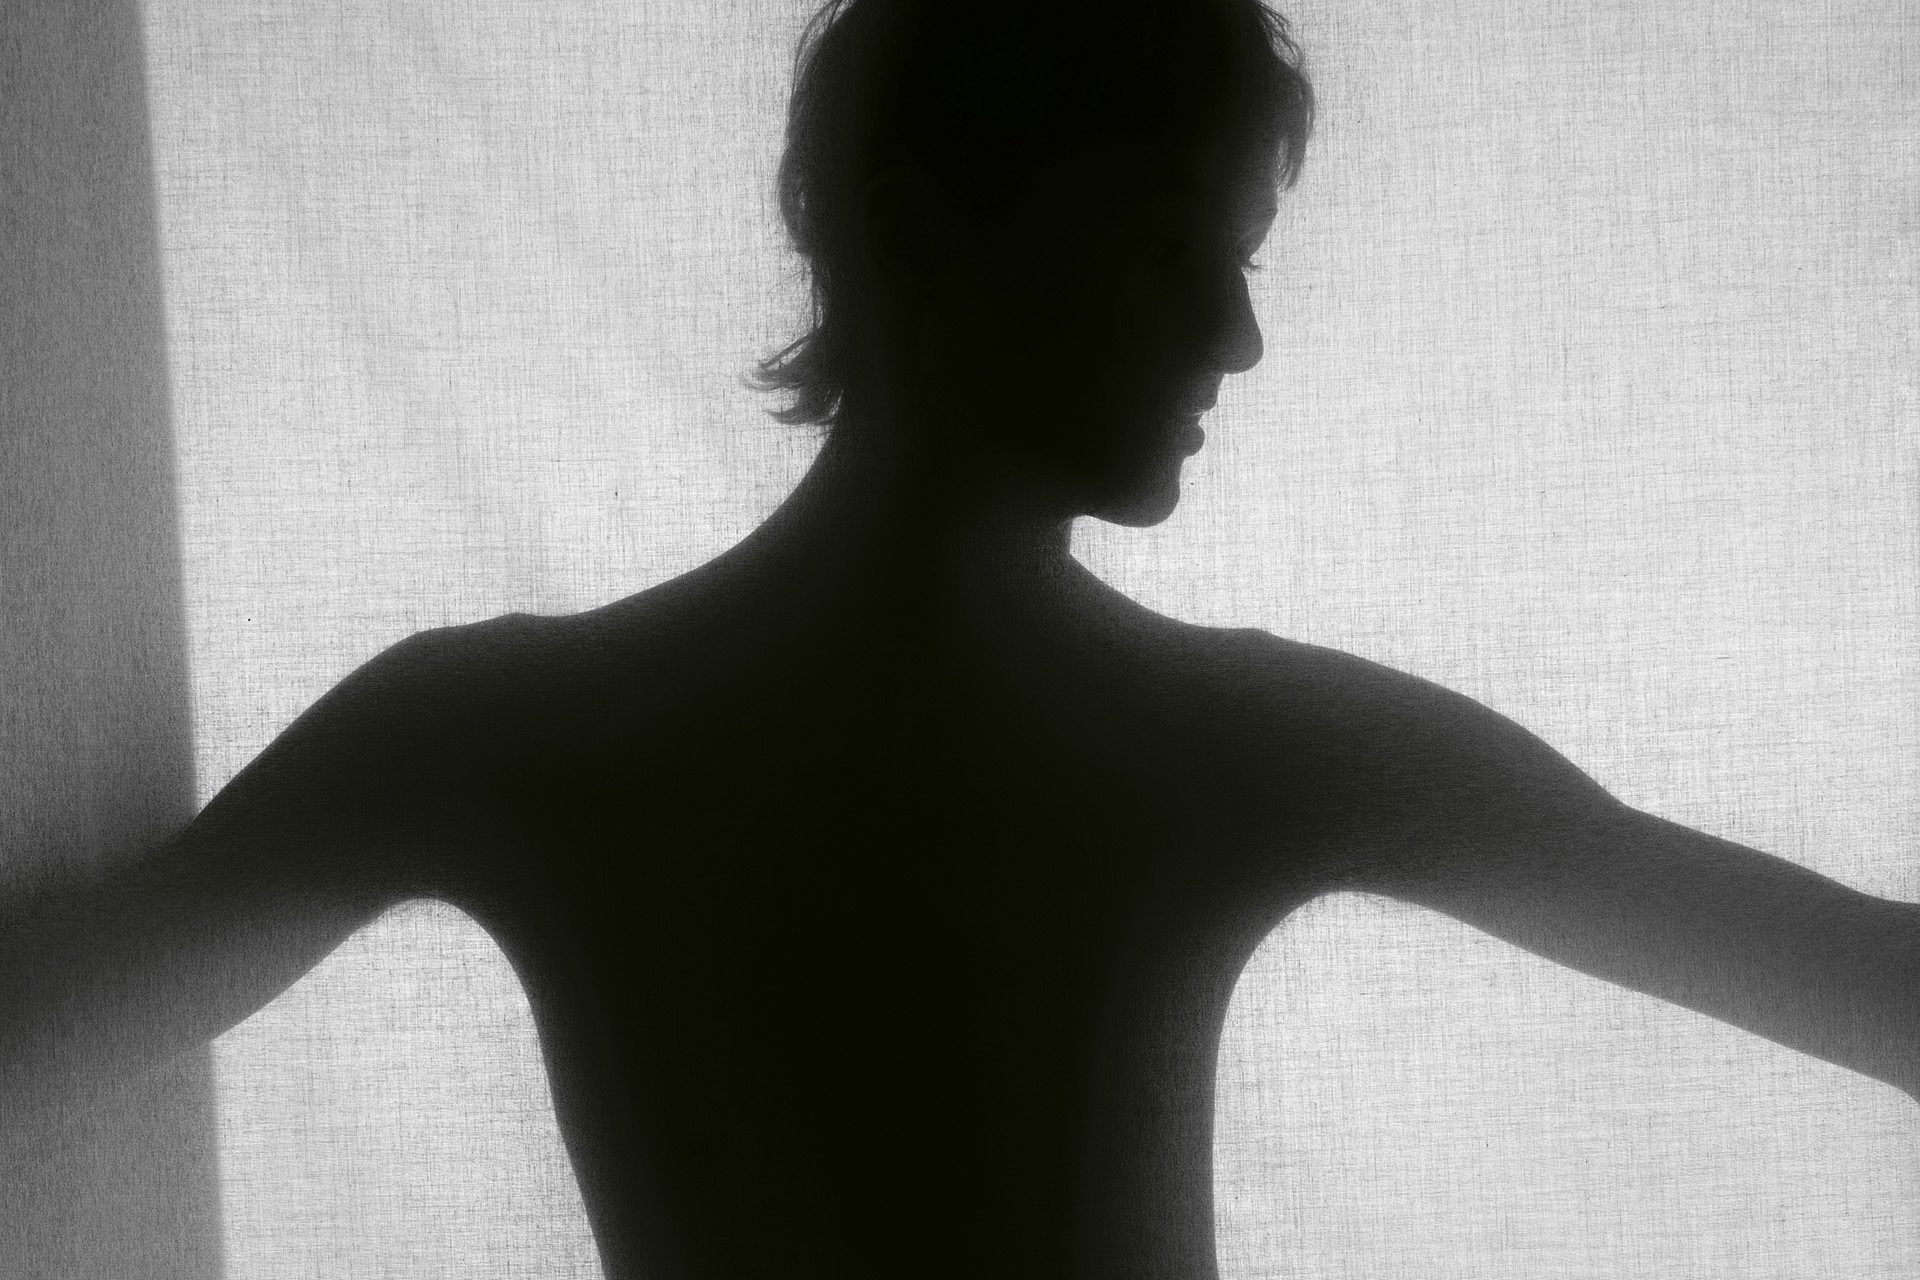 Silhouette of a boy with his arms outstretched standing in front of a piece of light fabric